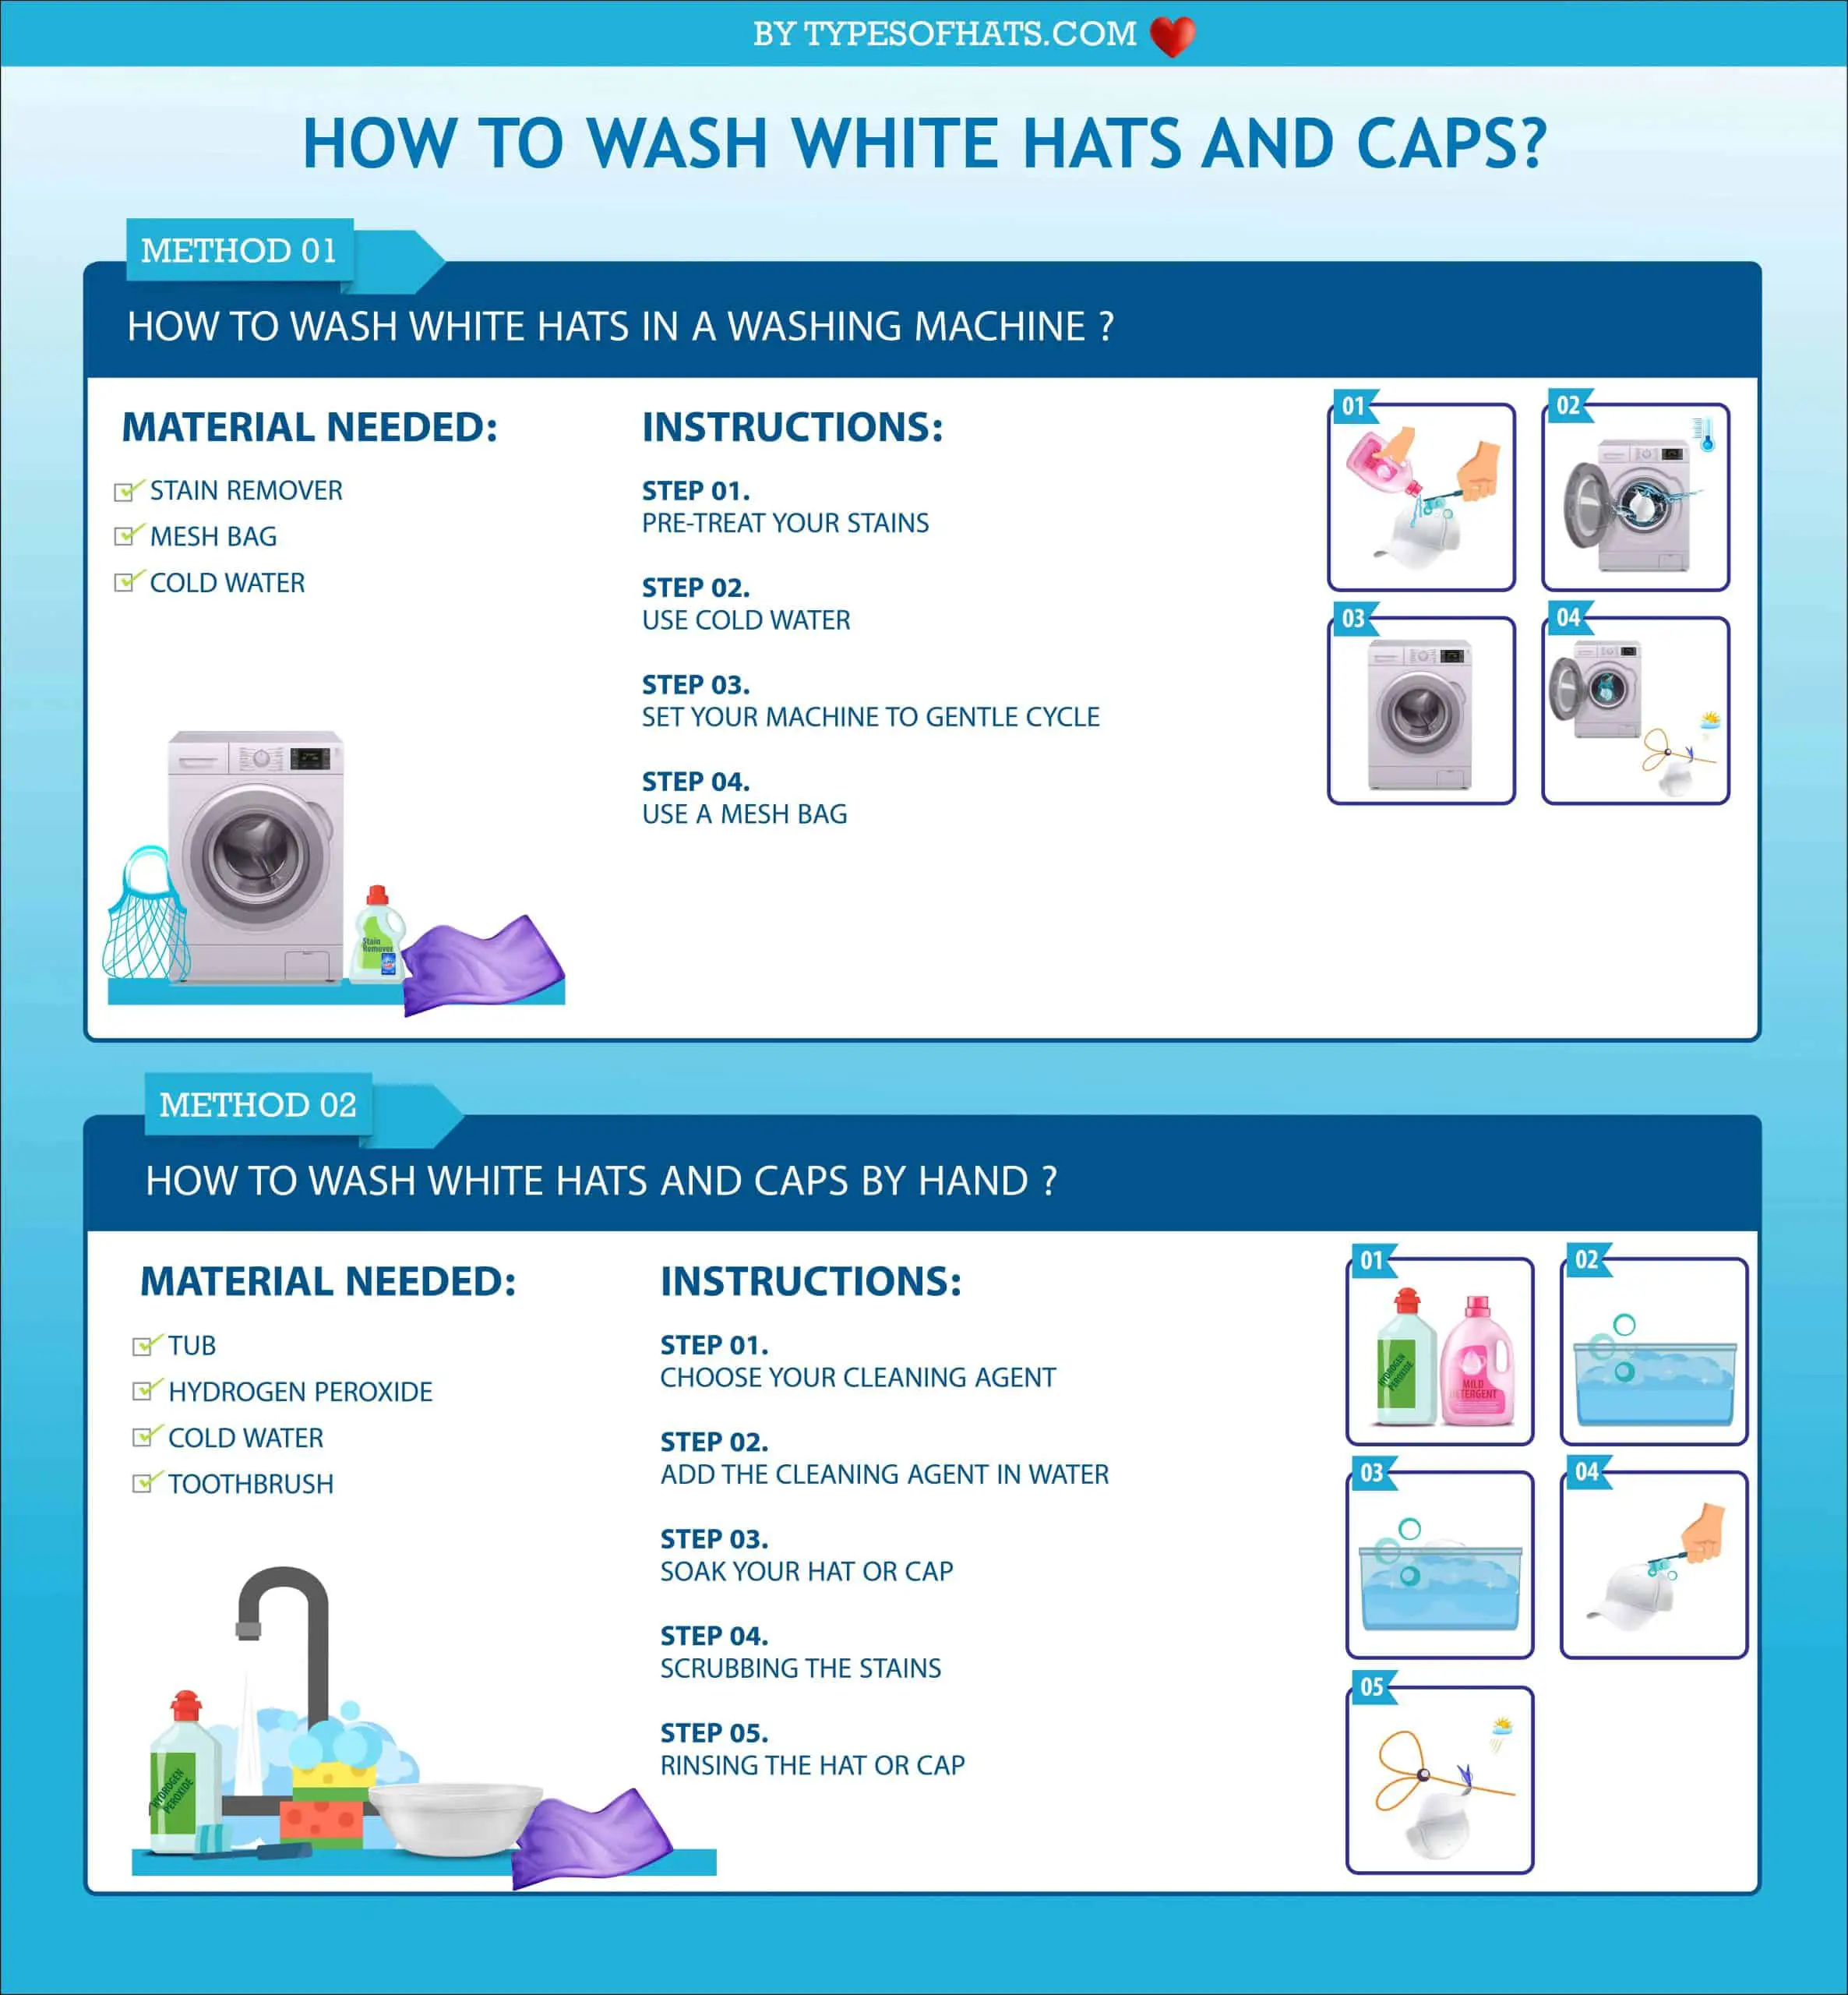 How to Wash White Caps and Hats